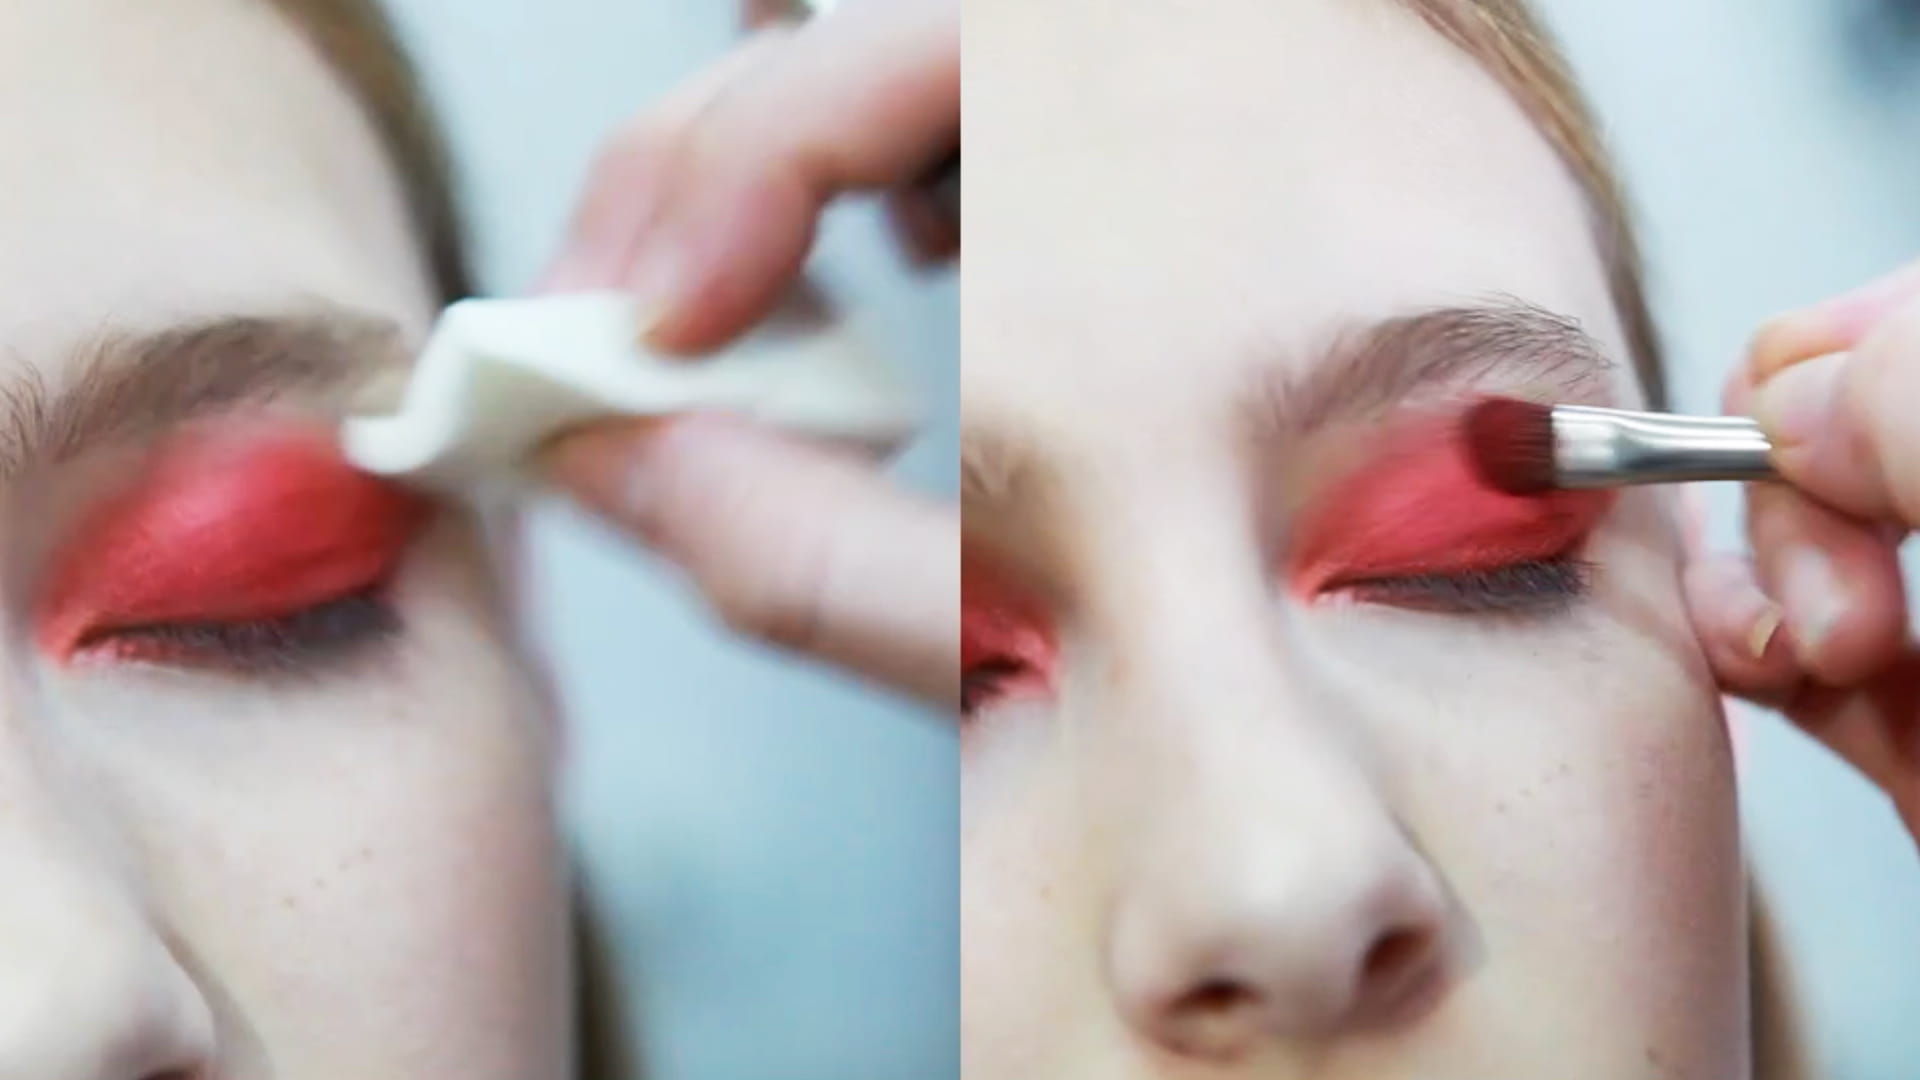 A makeup artist applies bright red eyeshadow to a model